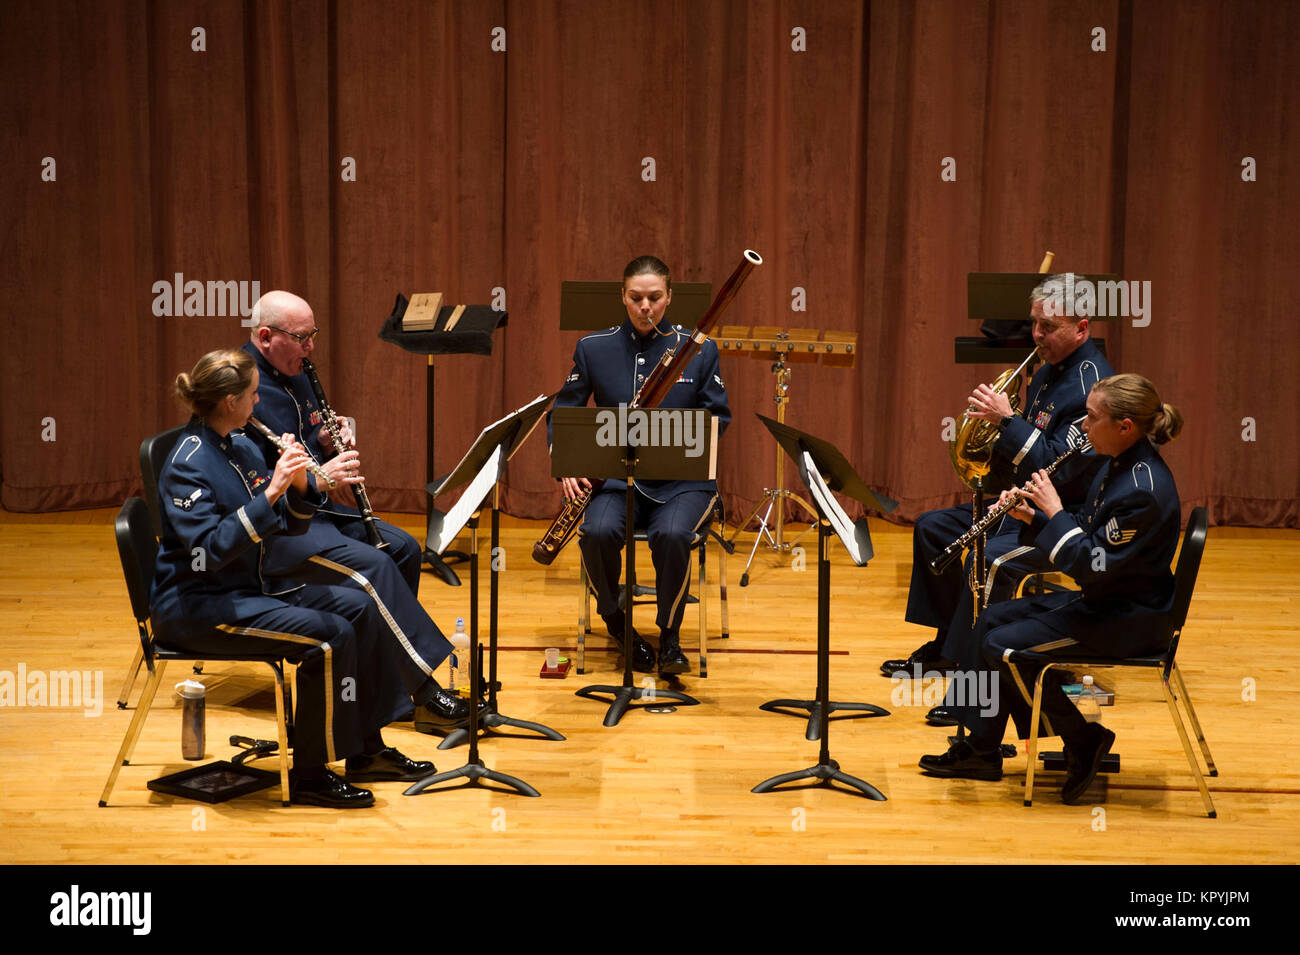 The Air Force Band of the West ensemble Spectrum Winds performs a holiday concert at Midwestern State University's Akin Auditorium Dec. 13, 2017, in Wichita Falls, Texas. The band tours across the United States and performs in various styles that range from classical to country. (U.S. Air Force Stock Photo